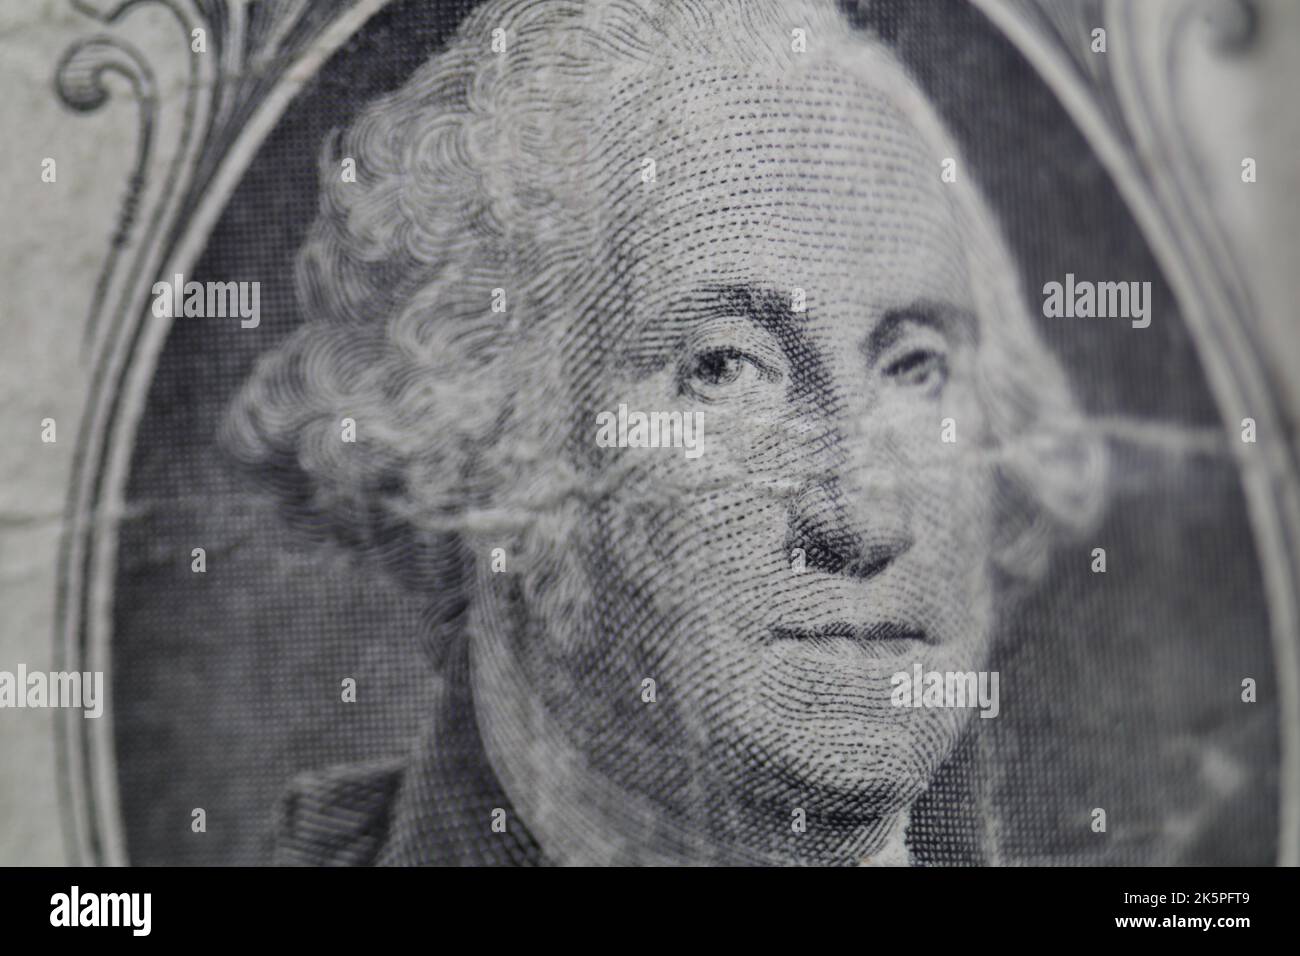 Macro view of George Washington on worn out dirty US one dollar bill. Stock Photo